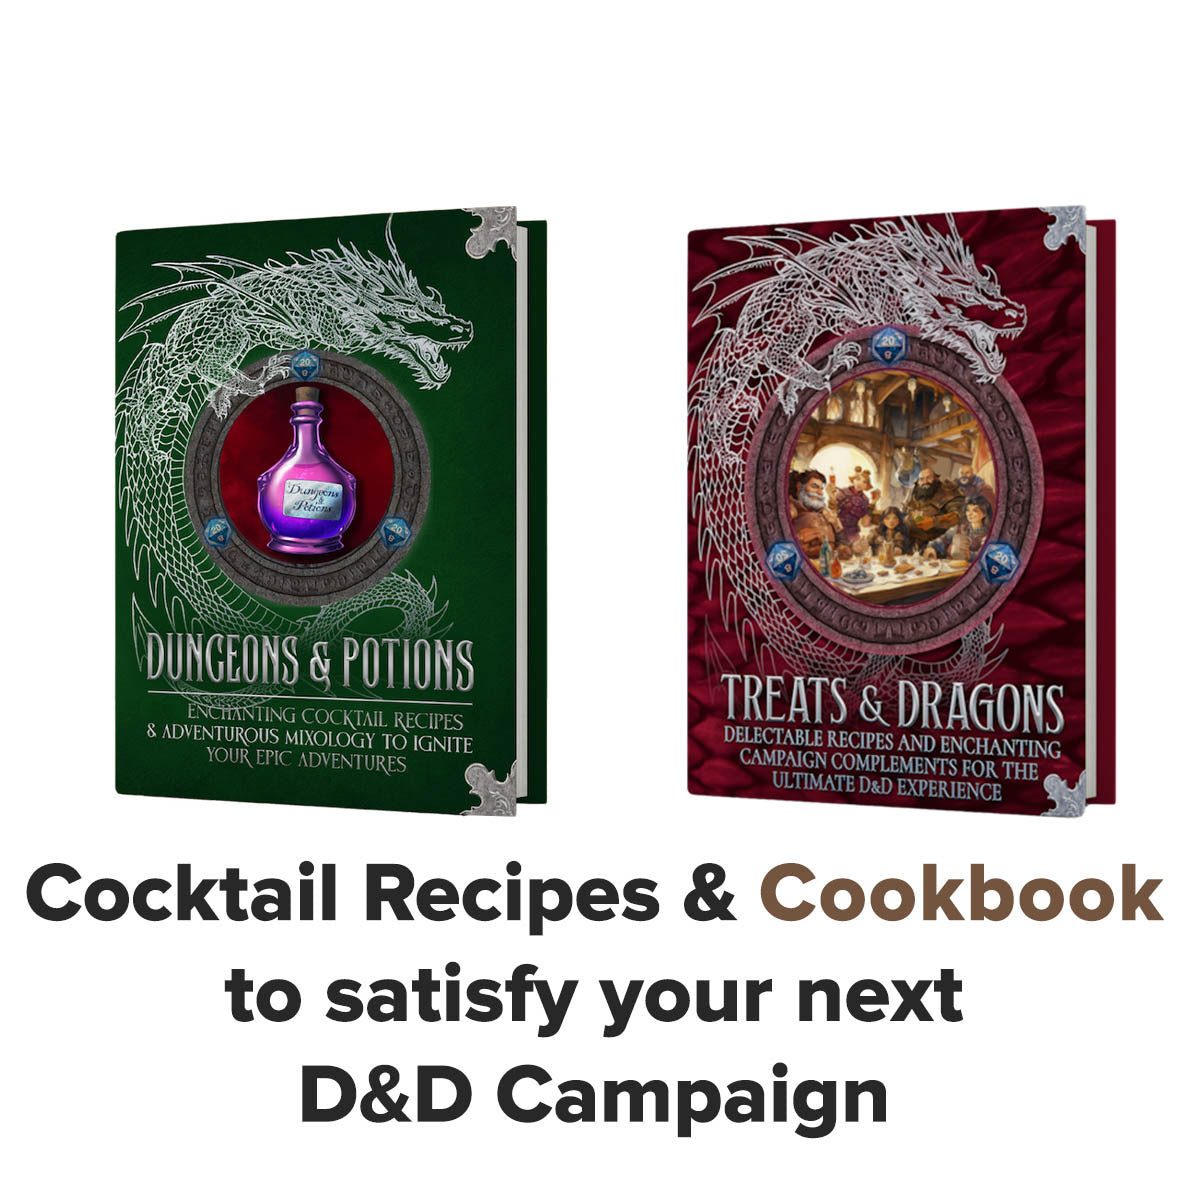 Example Facebook Ad Image for Dungeons & Potions, which raised $280,000 on Kickstarter and Backerkit